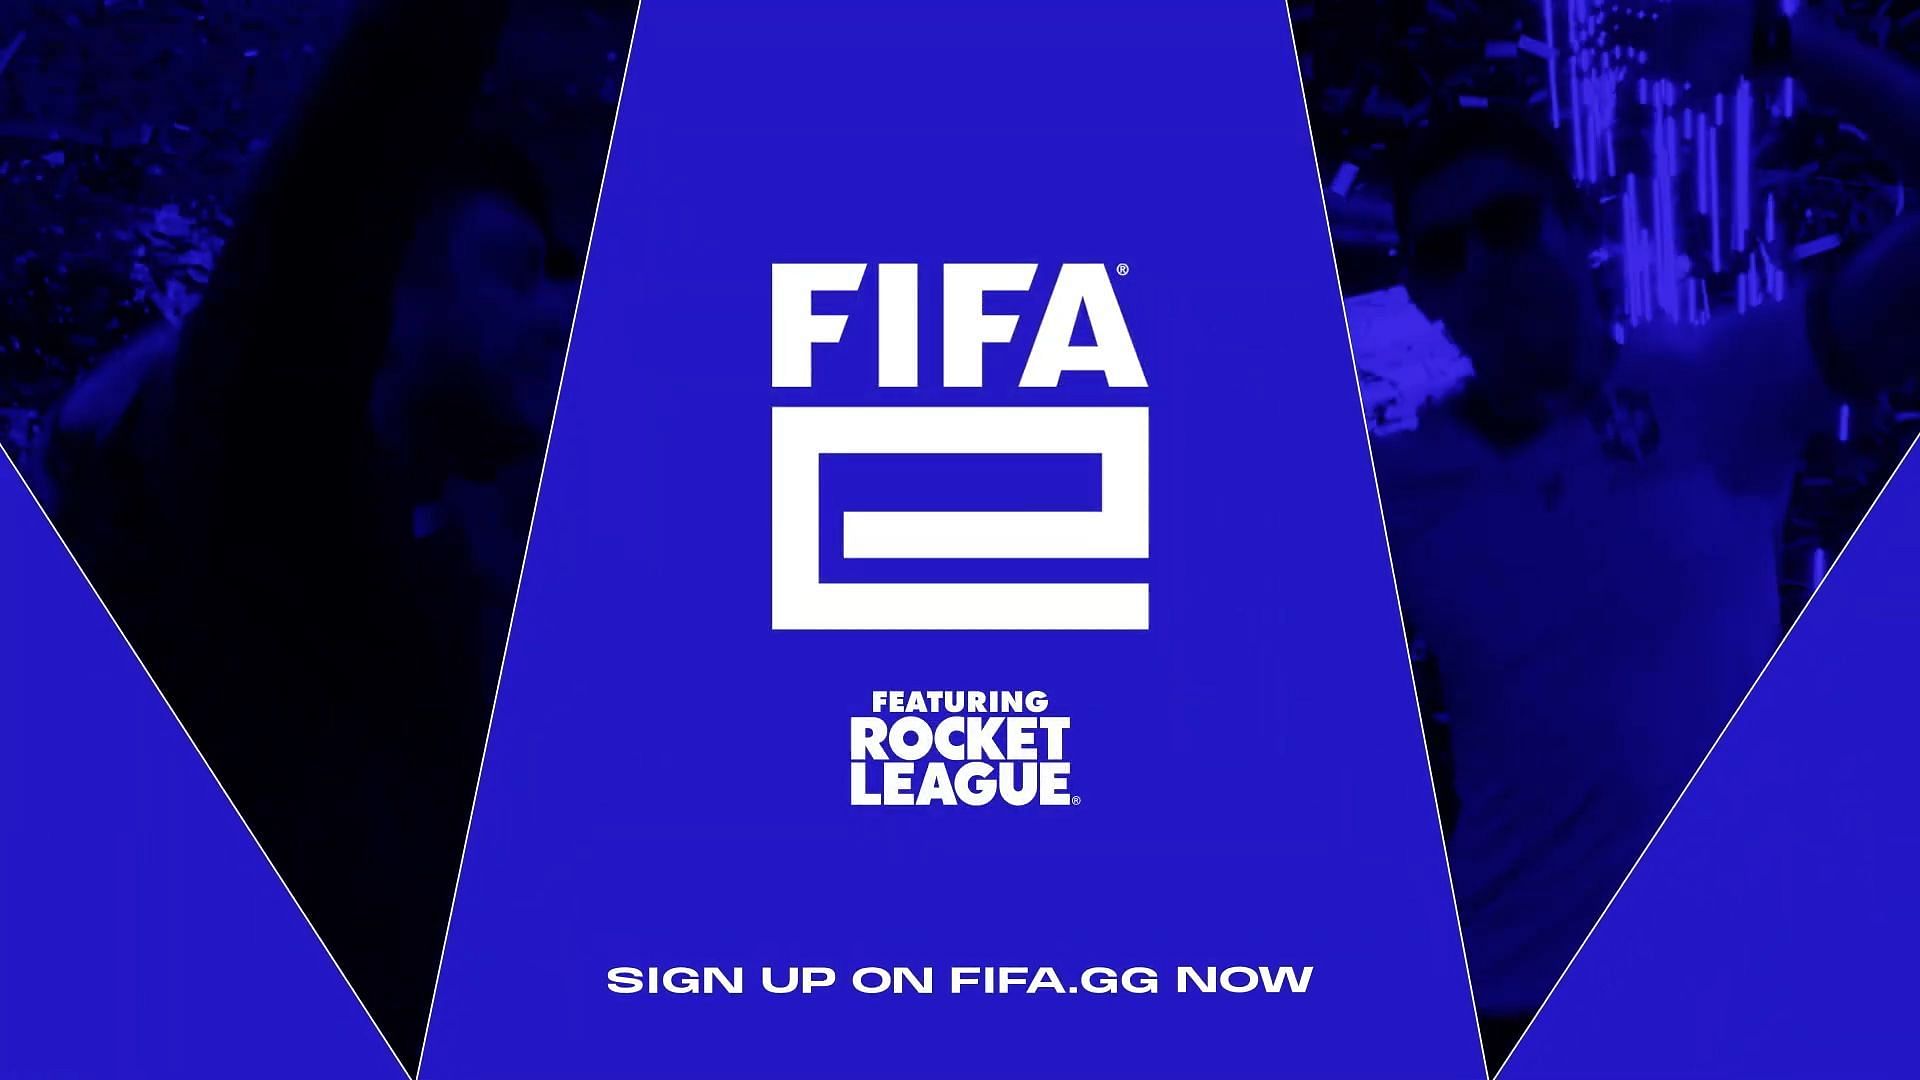 Registrations open for FIFAe World Cup featuring Rocket League (Image via YouTube/FIFAe)